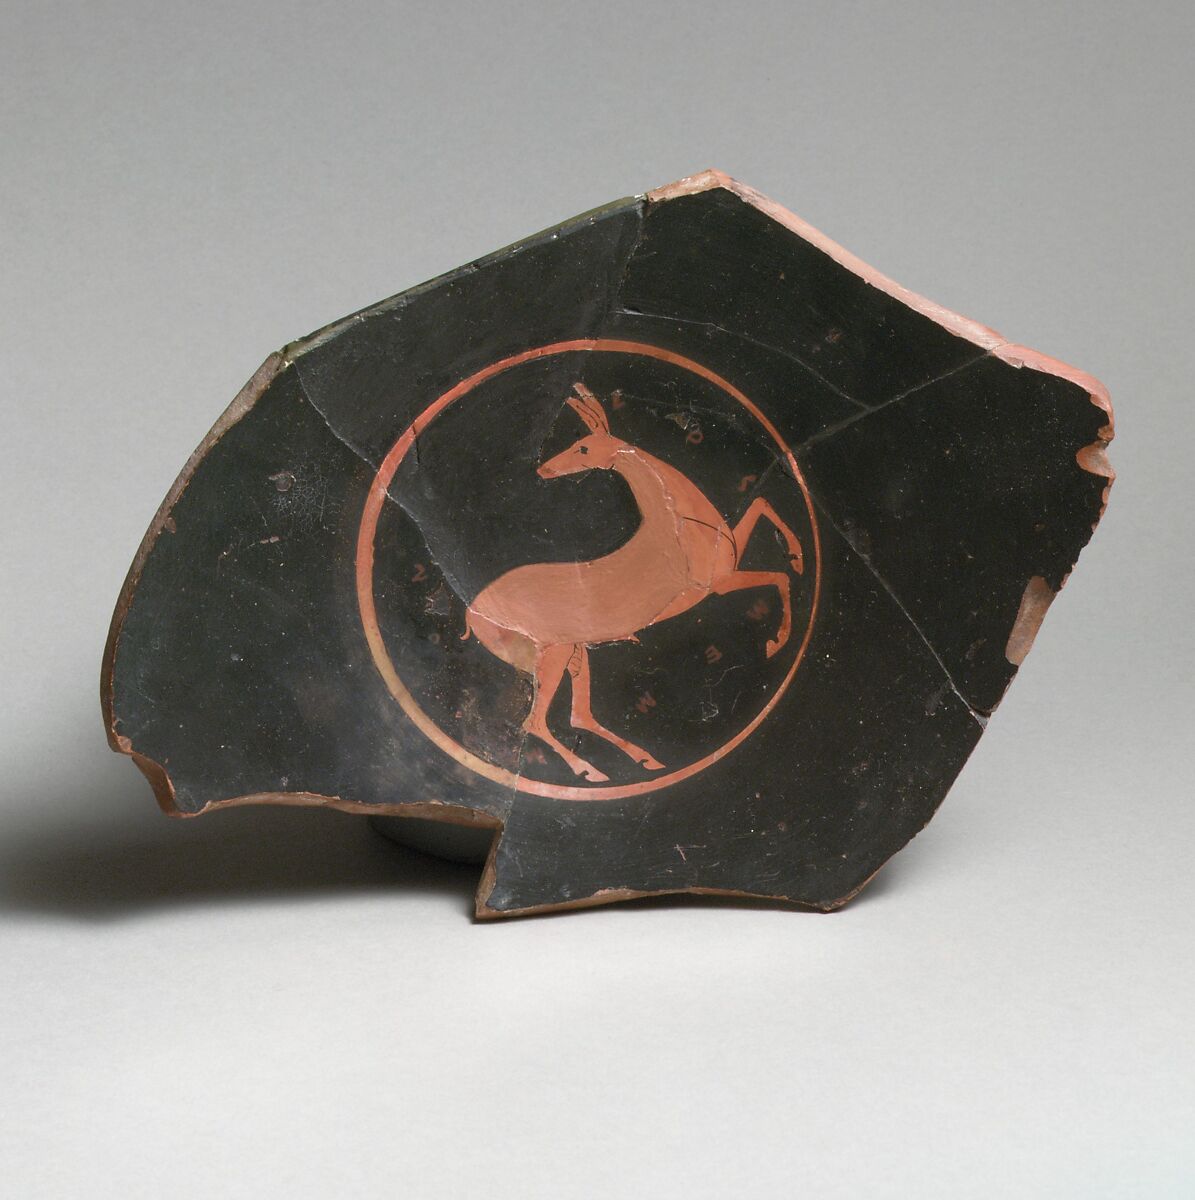 Kylix fragment, Attributed to Oltos, Terracotta, Greek, Attic 